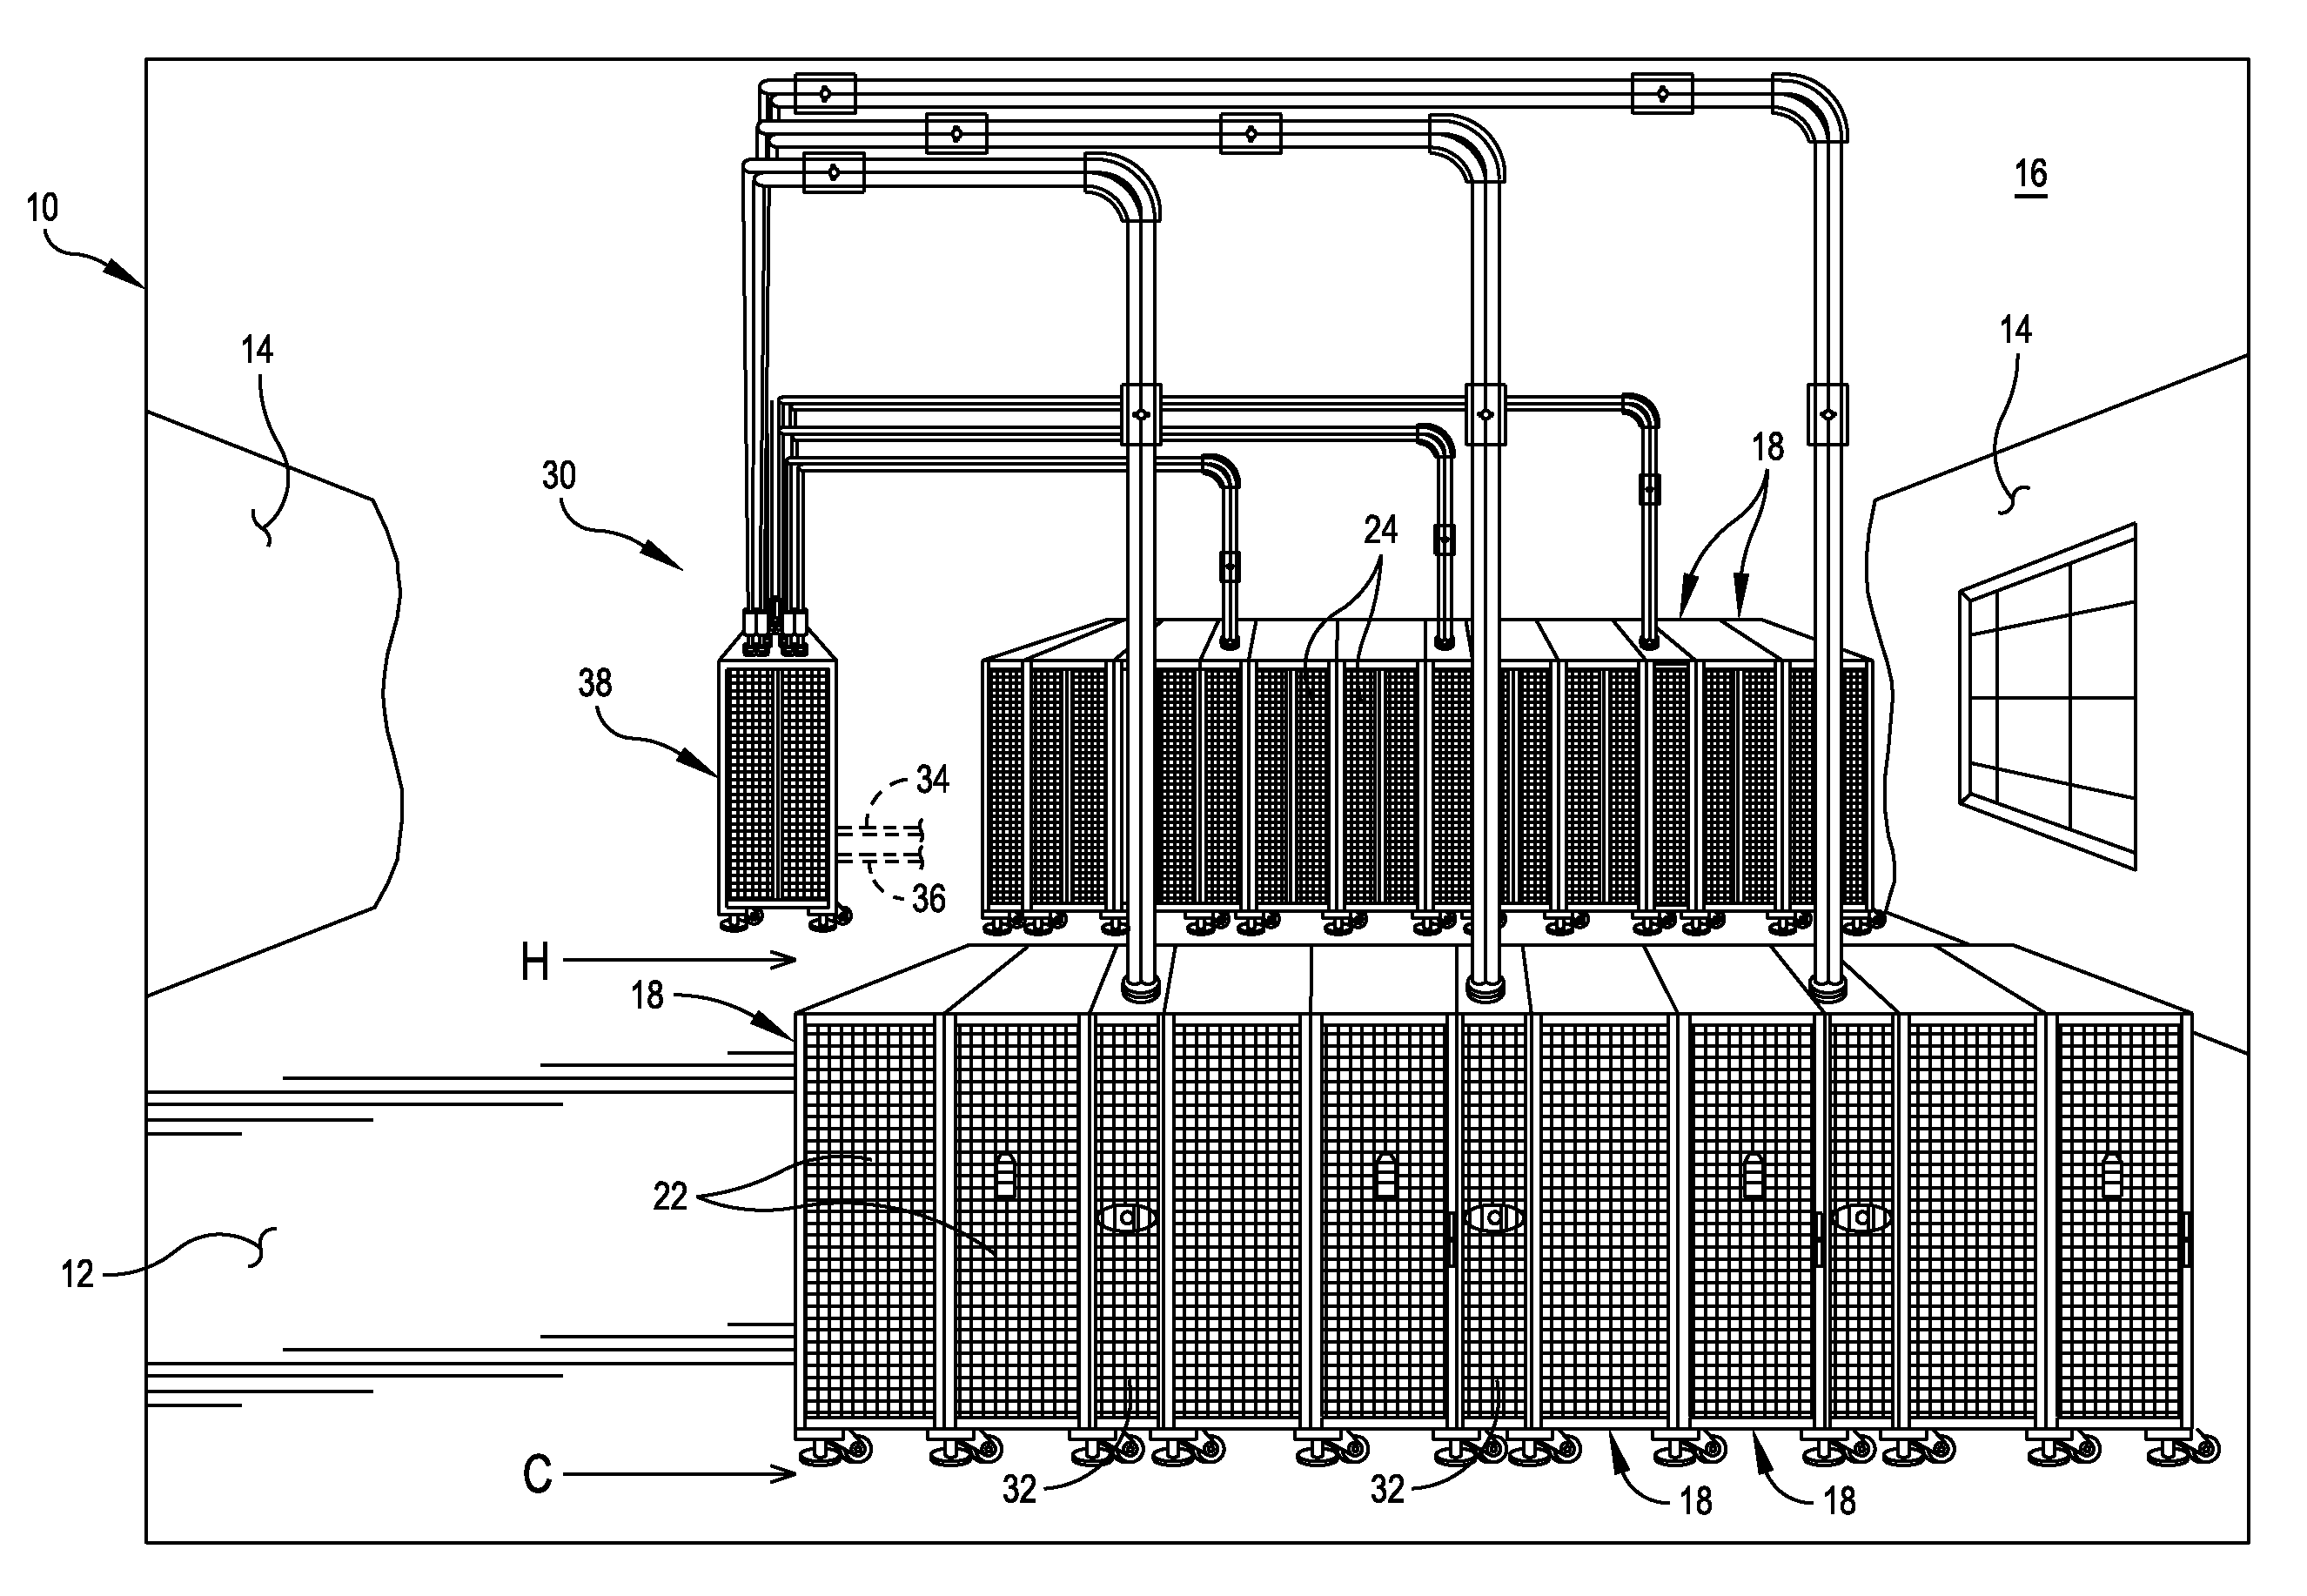 Systems and methods for detecting refrigerant leaks in cooling systems